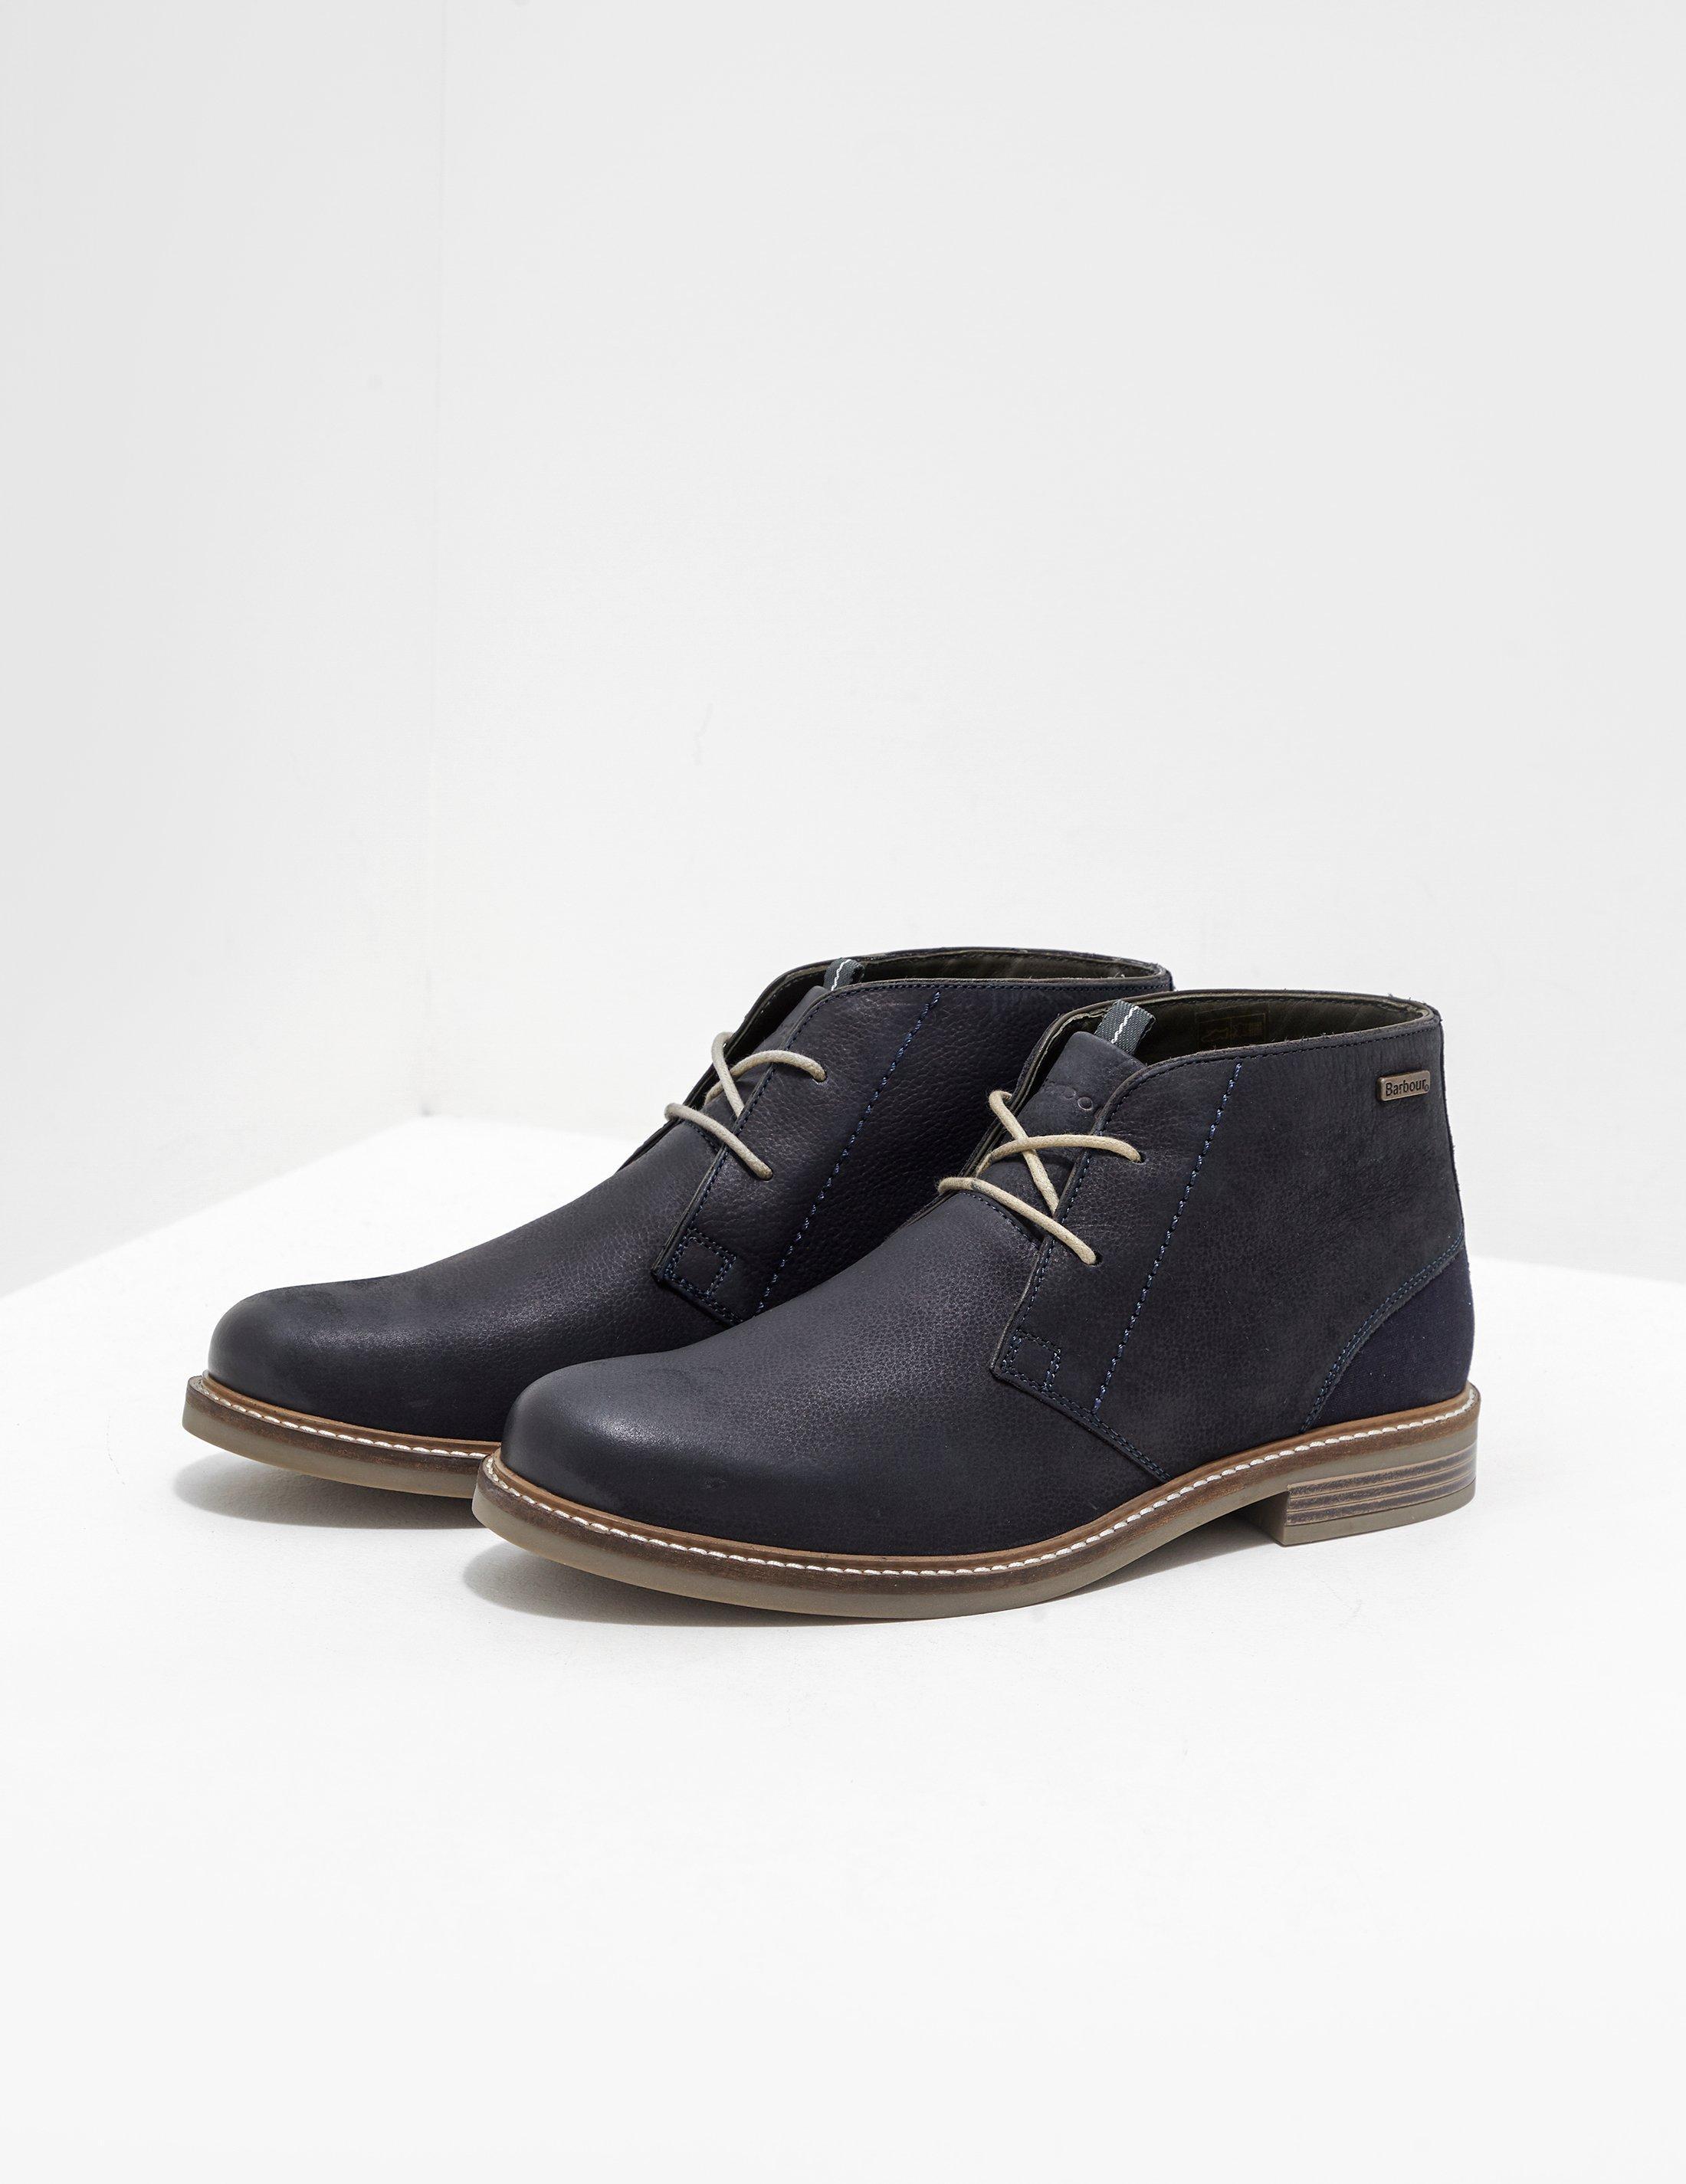 Barbour Cotton Readhead Boot Navy Blue for Men - Lyst